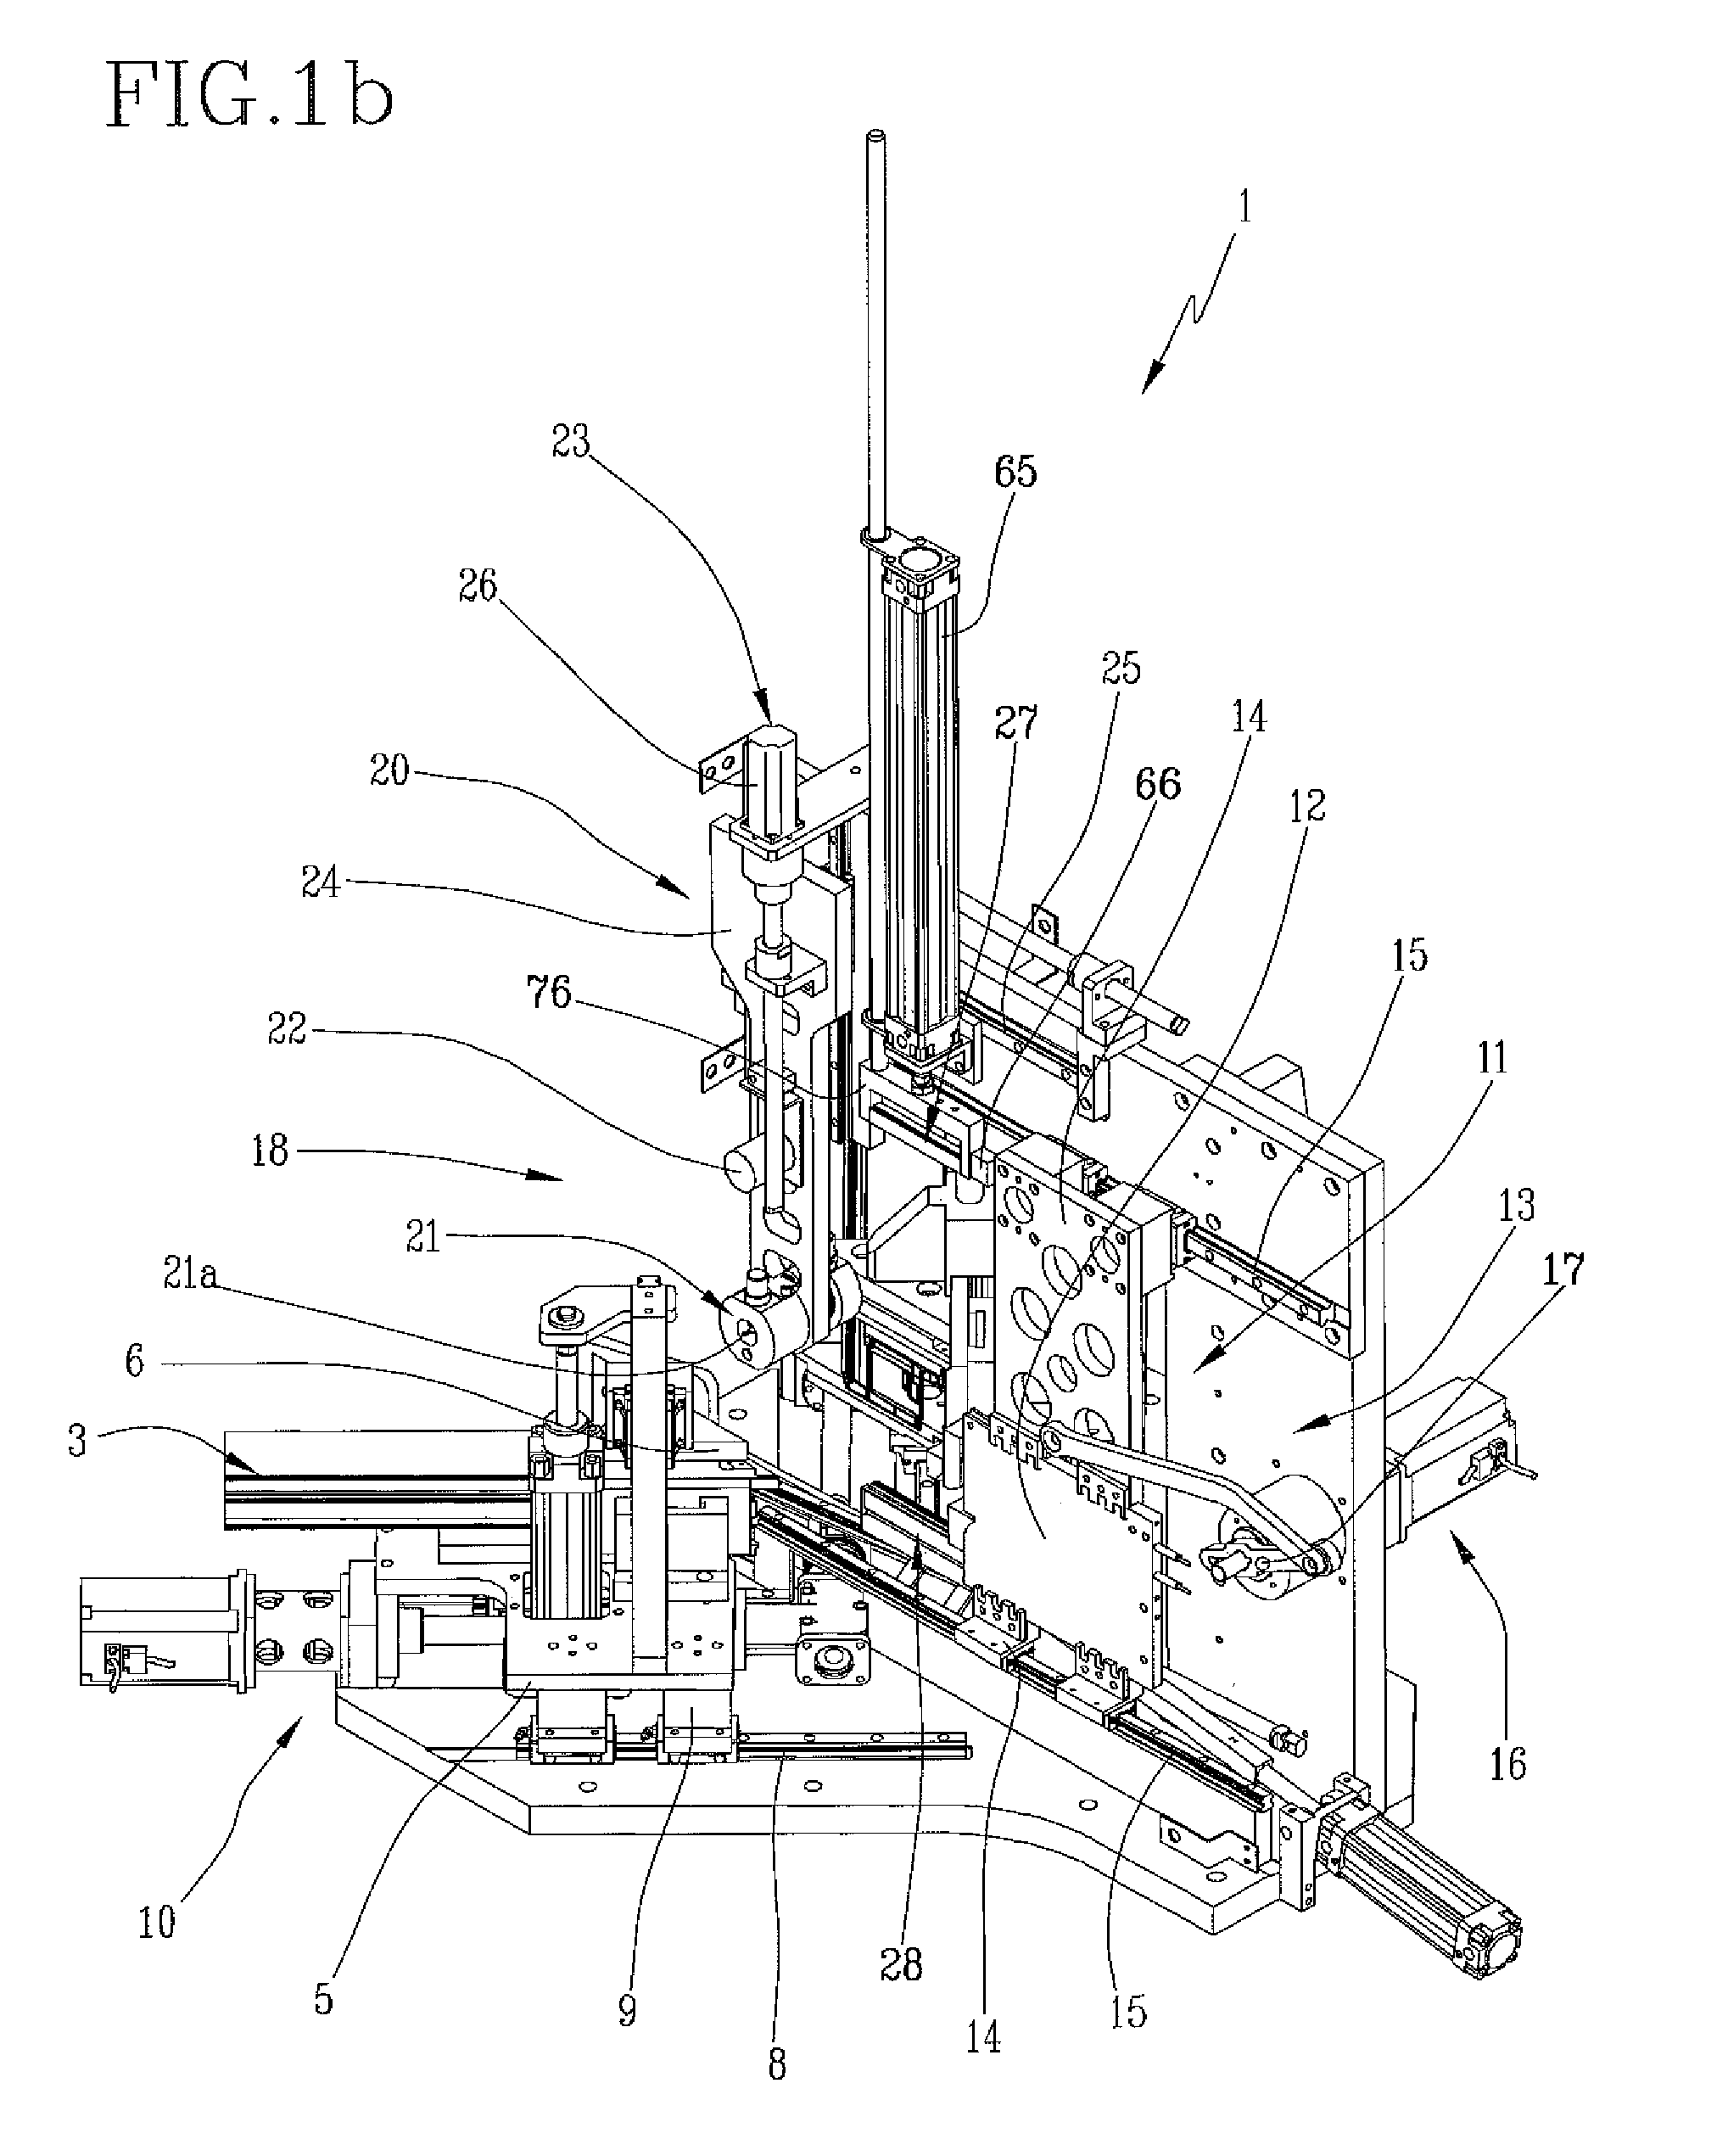 Method and device for welding profiled elements made of a plastic material, in particular PVC